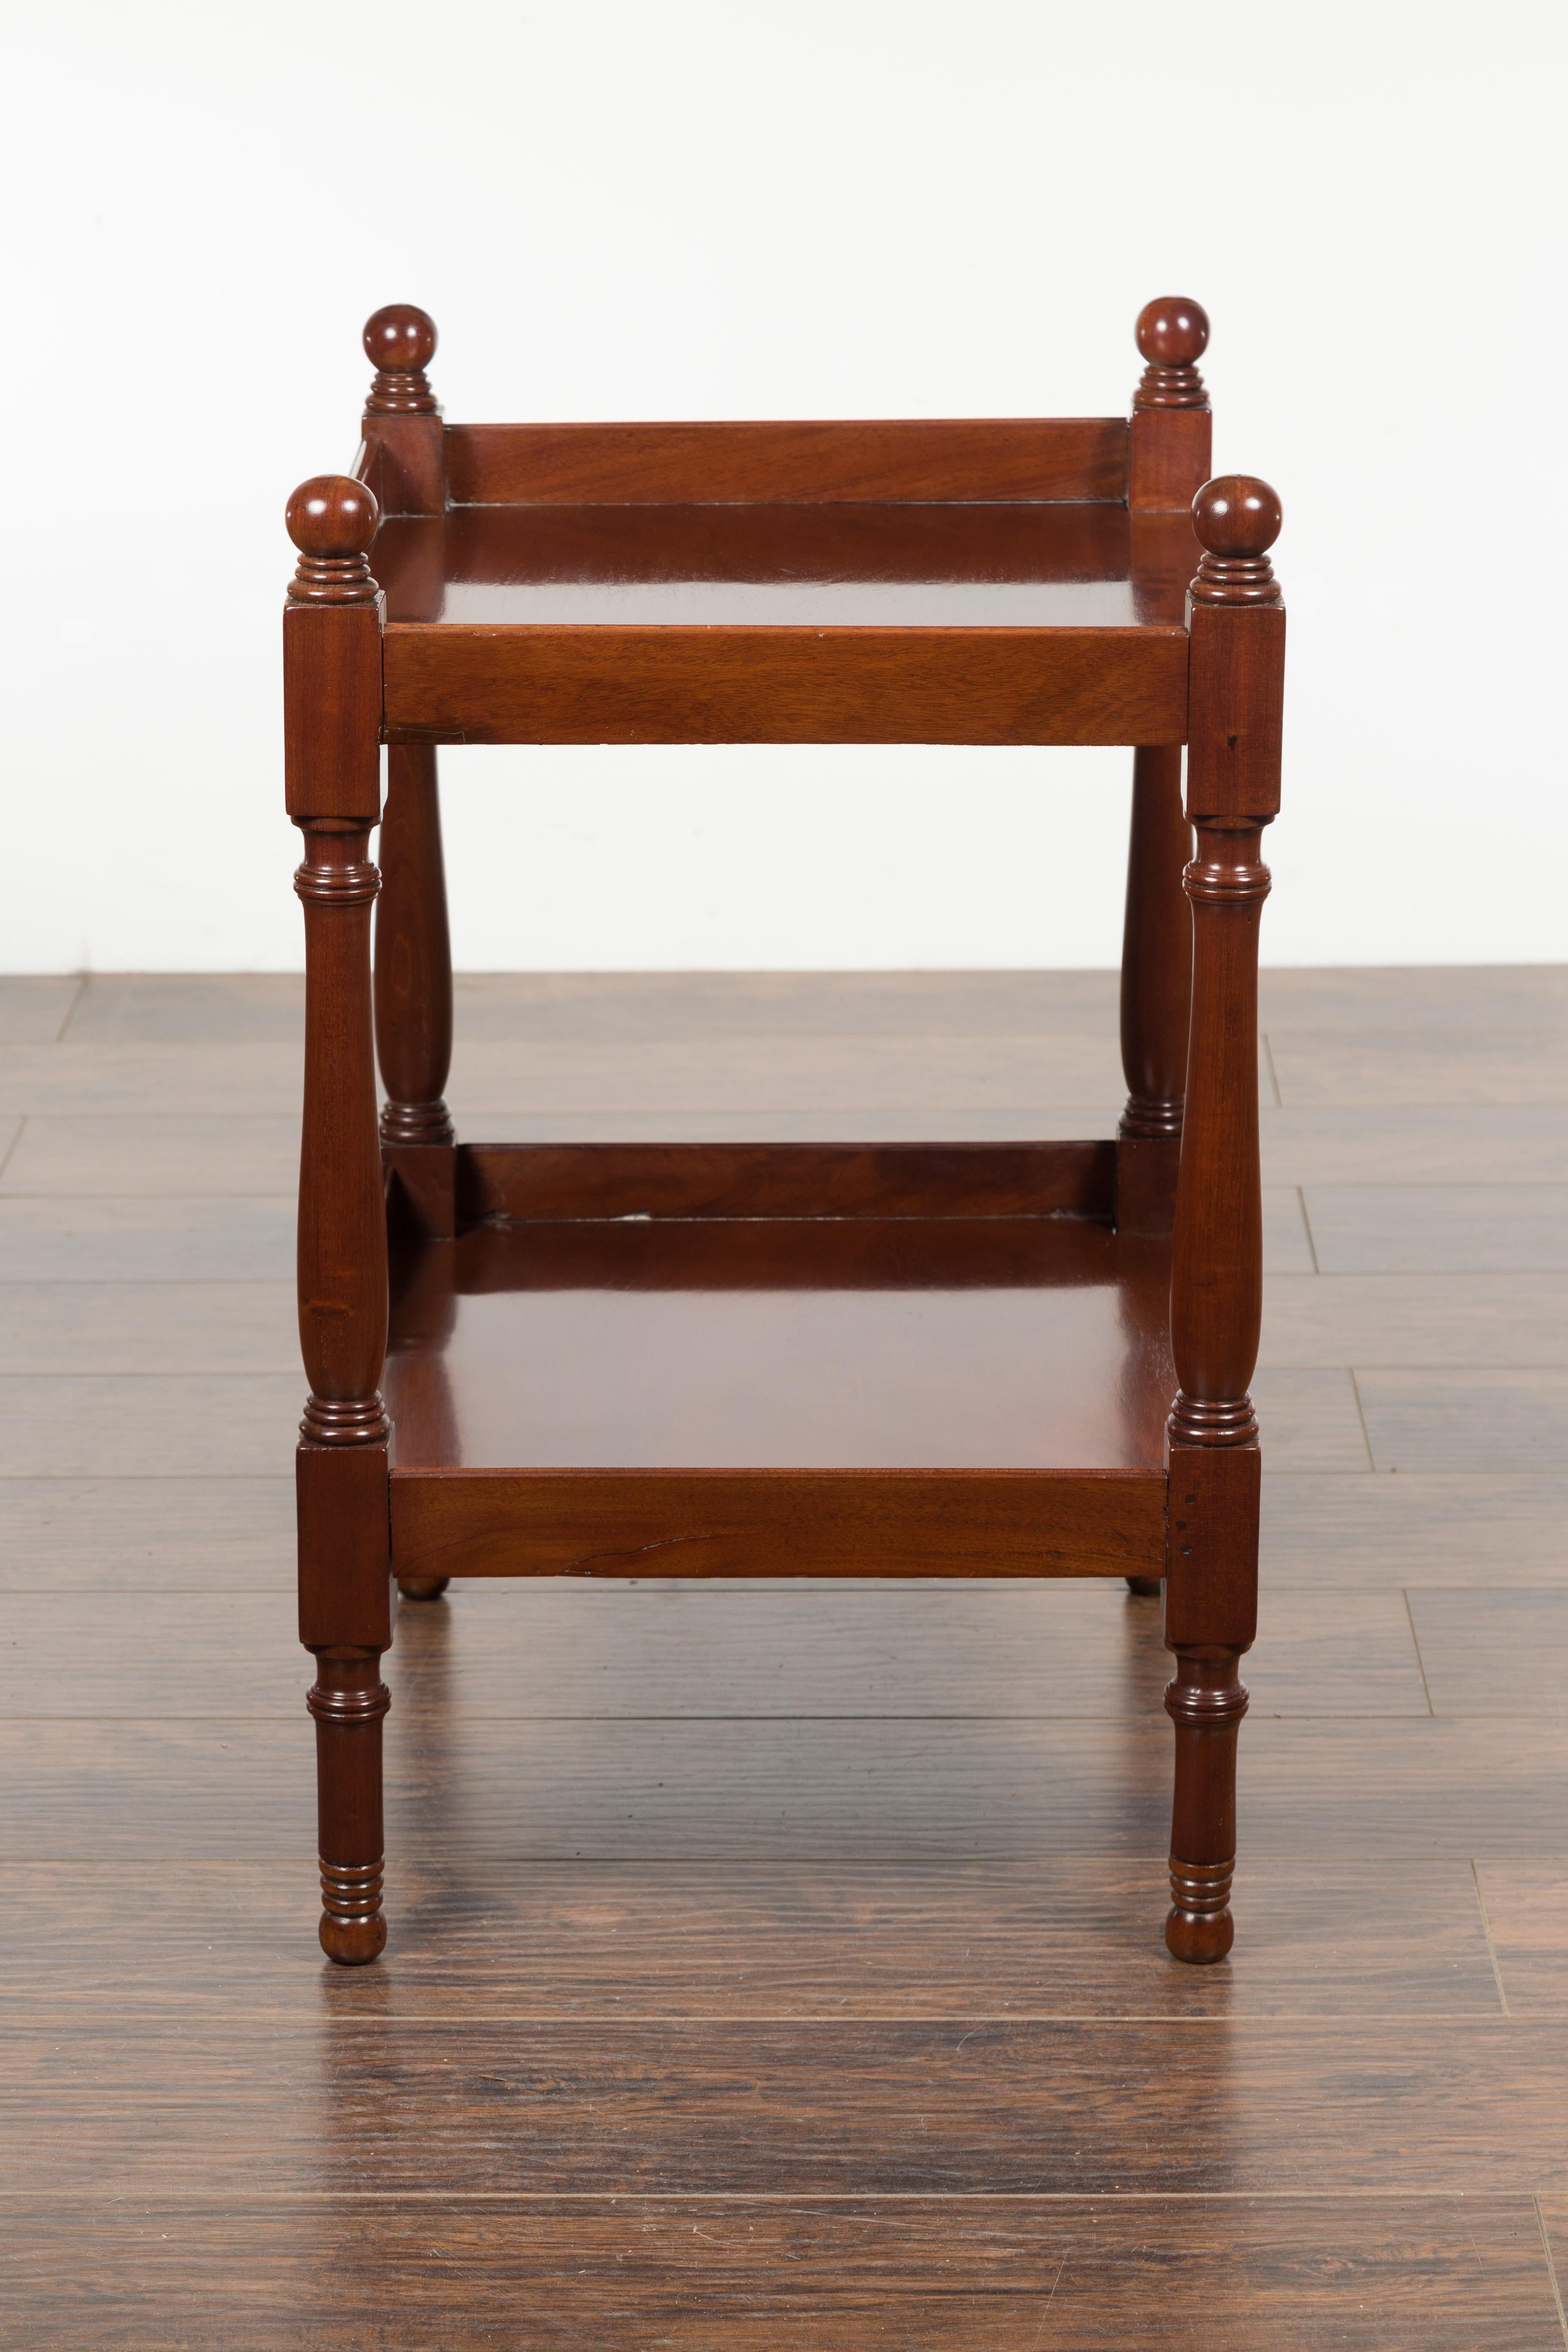 English 1870s Mahogany Tiered Table with Turned Legs and Low Shelf and Finials 8